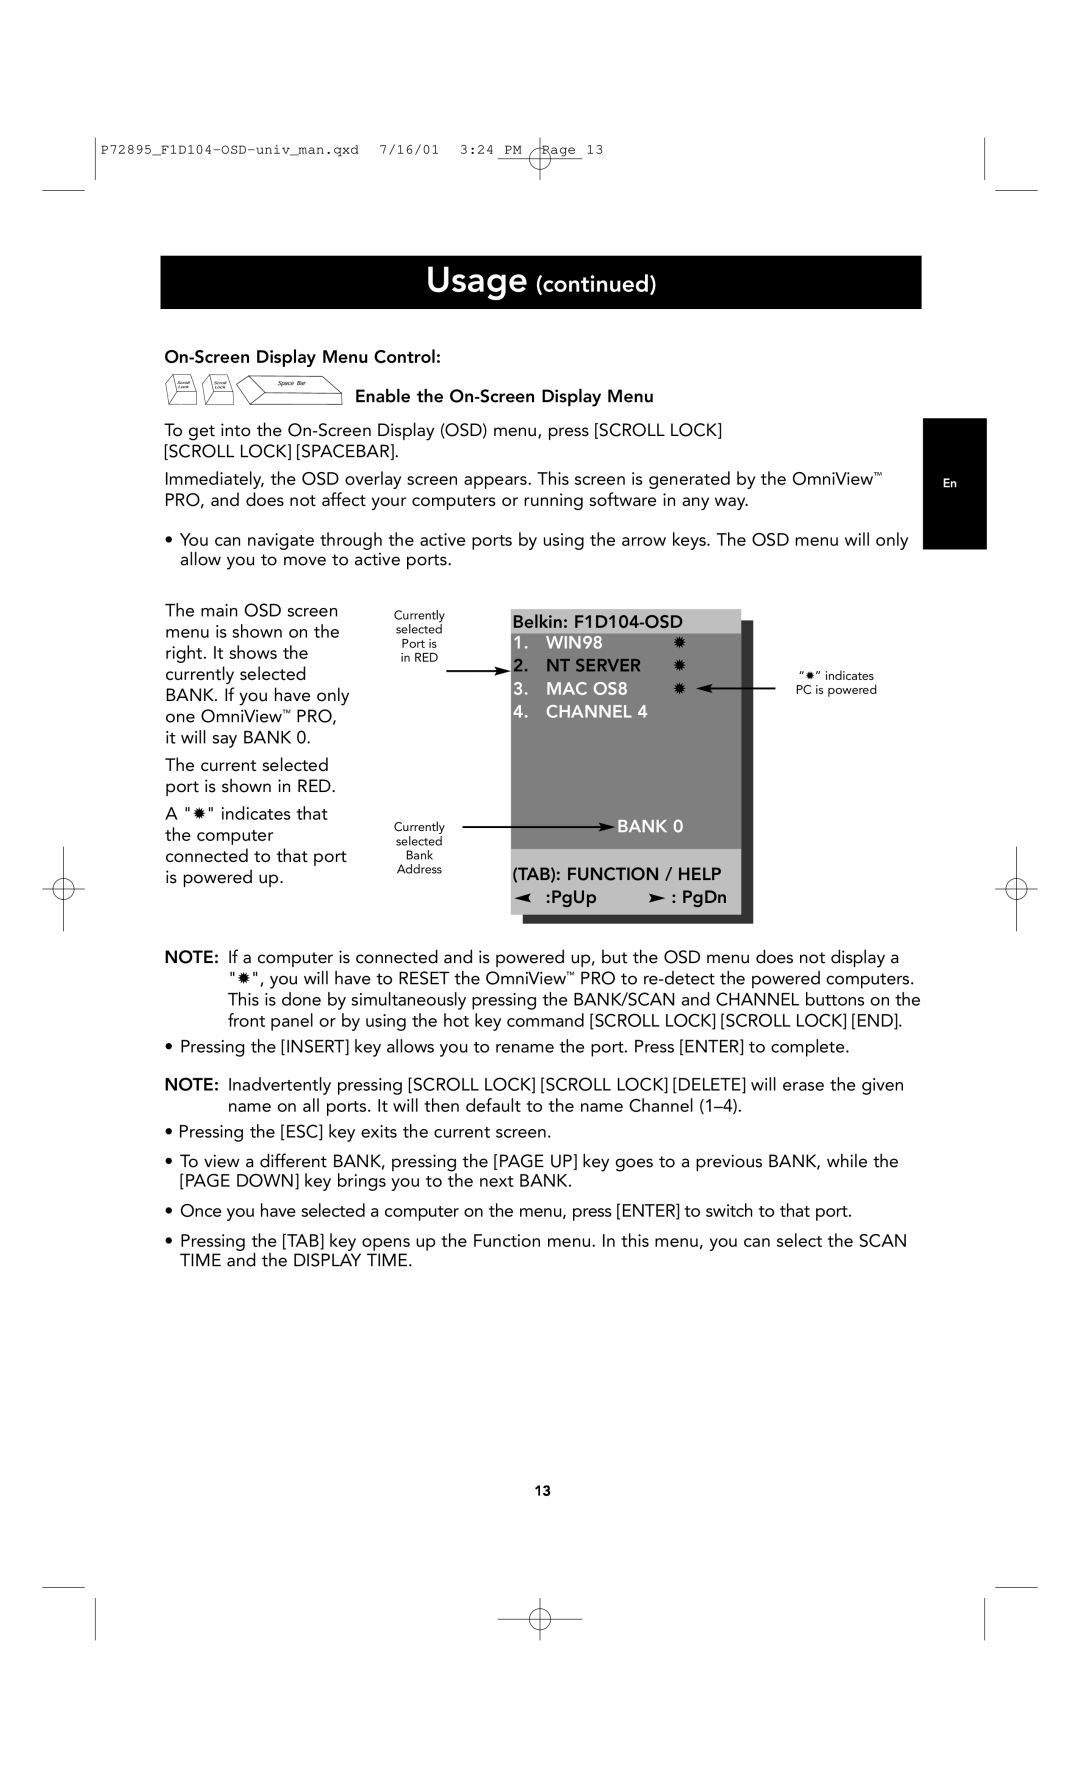 Belkin F1D104-OSD user manual Usage continued, WIN98, Nt Server, MAC OS8, Channel, Bank 